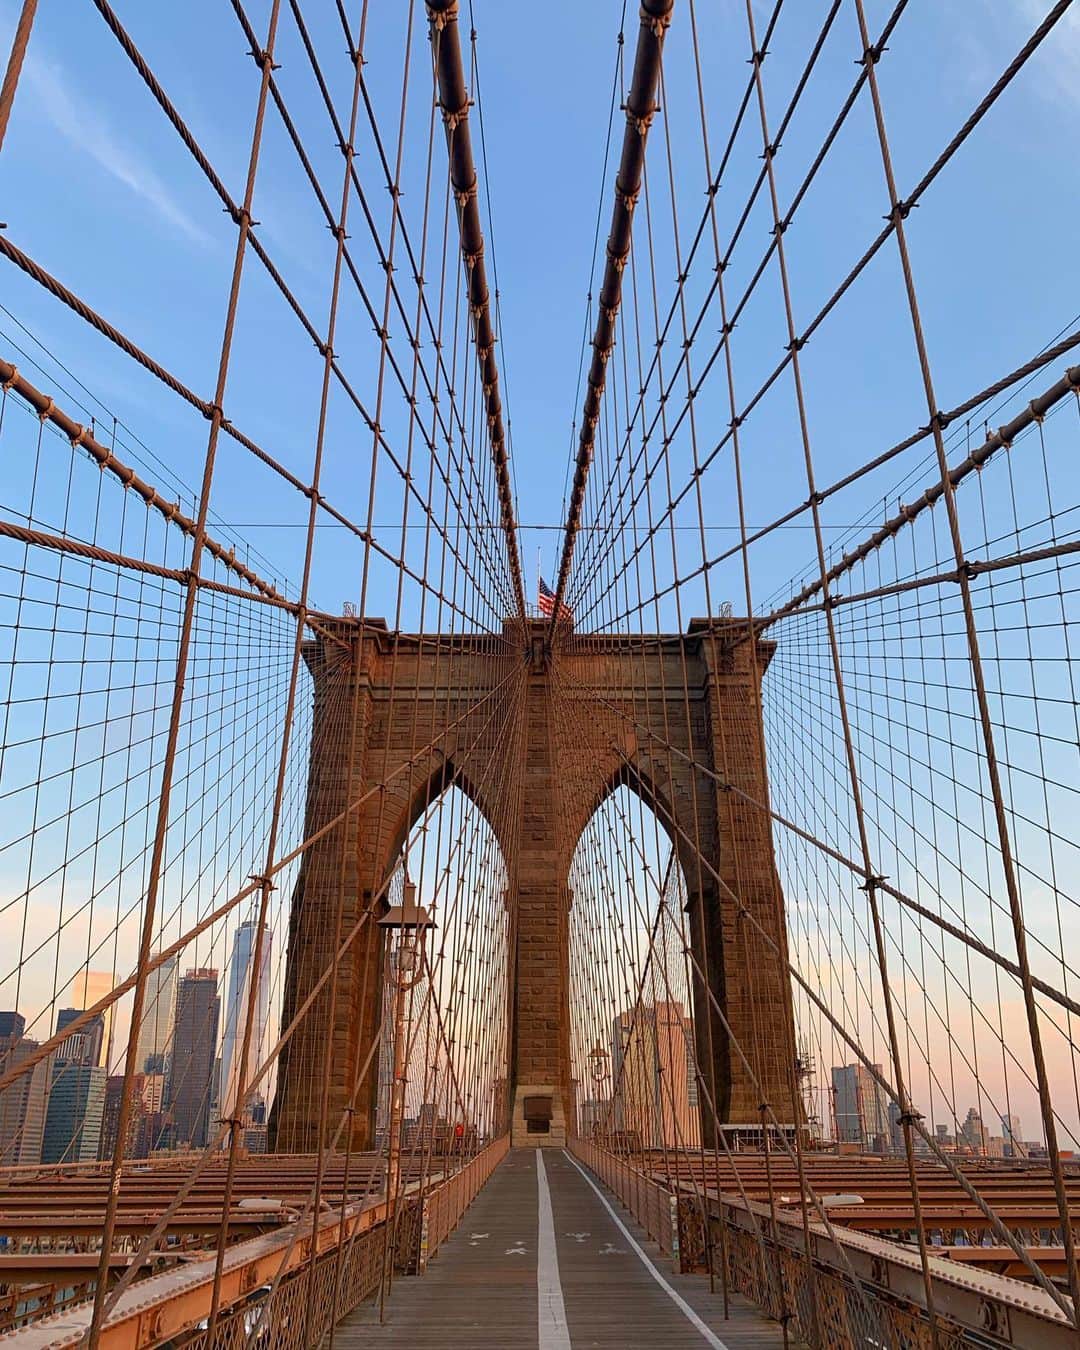 The Peninsula New Yorkのインスタグラム：「New York‘s iconic Brooklyn Bridge, designed by John Augustus Roebling, is a classic part of the New York skyline. This masterpiece took 14 years to build and was completed in 1883. The bridge connects the city’s oldest neighborhood, the Financial District to historic Brooklyn Heights . . . . . #NewYorkCity #NewYork #BrooklynBridge #nycarchitecture #nyc #summer」